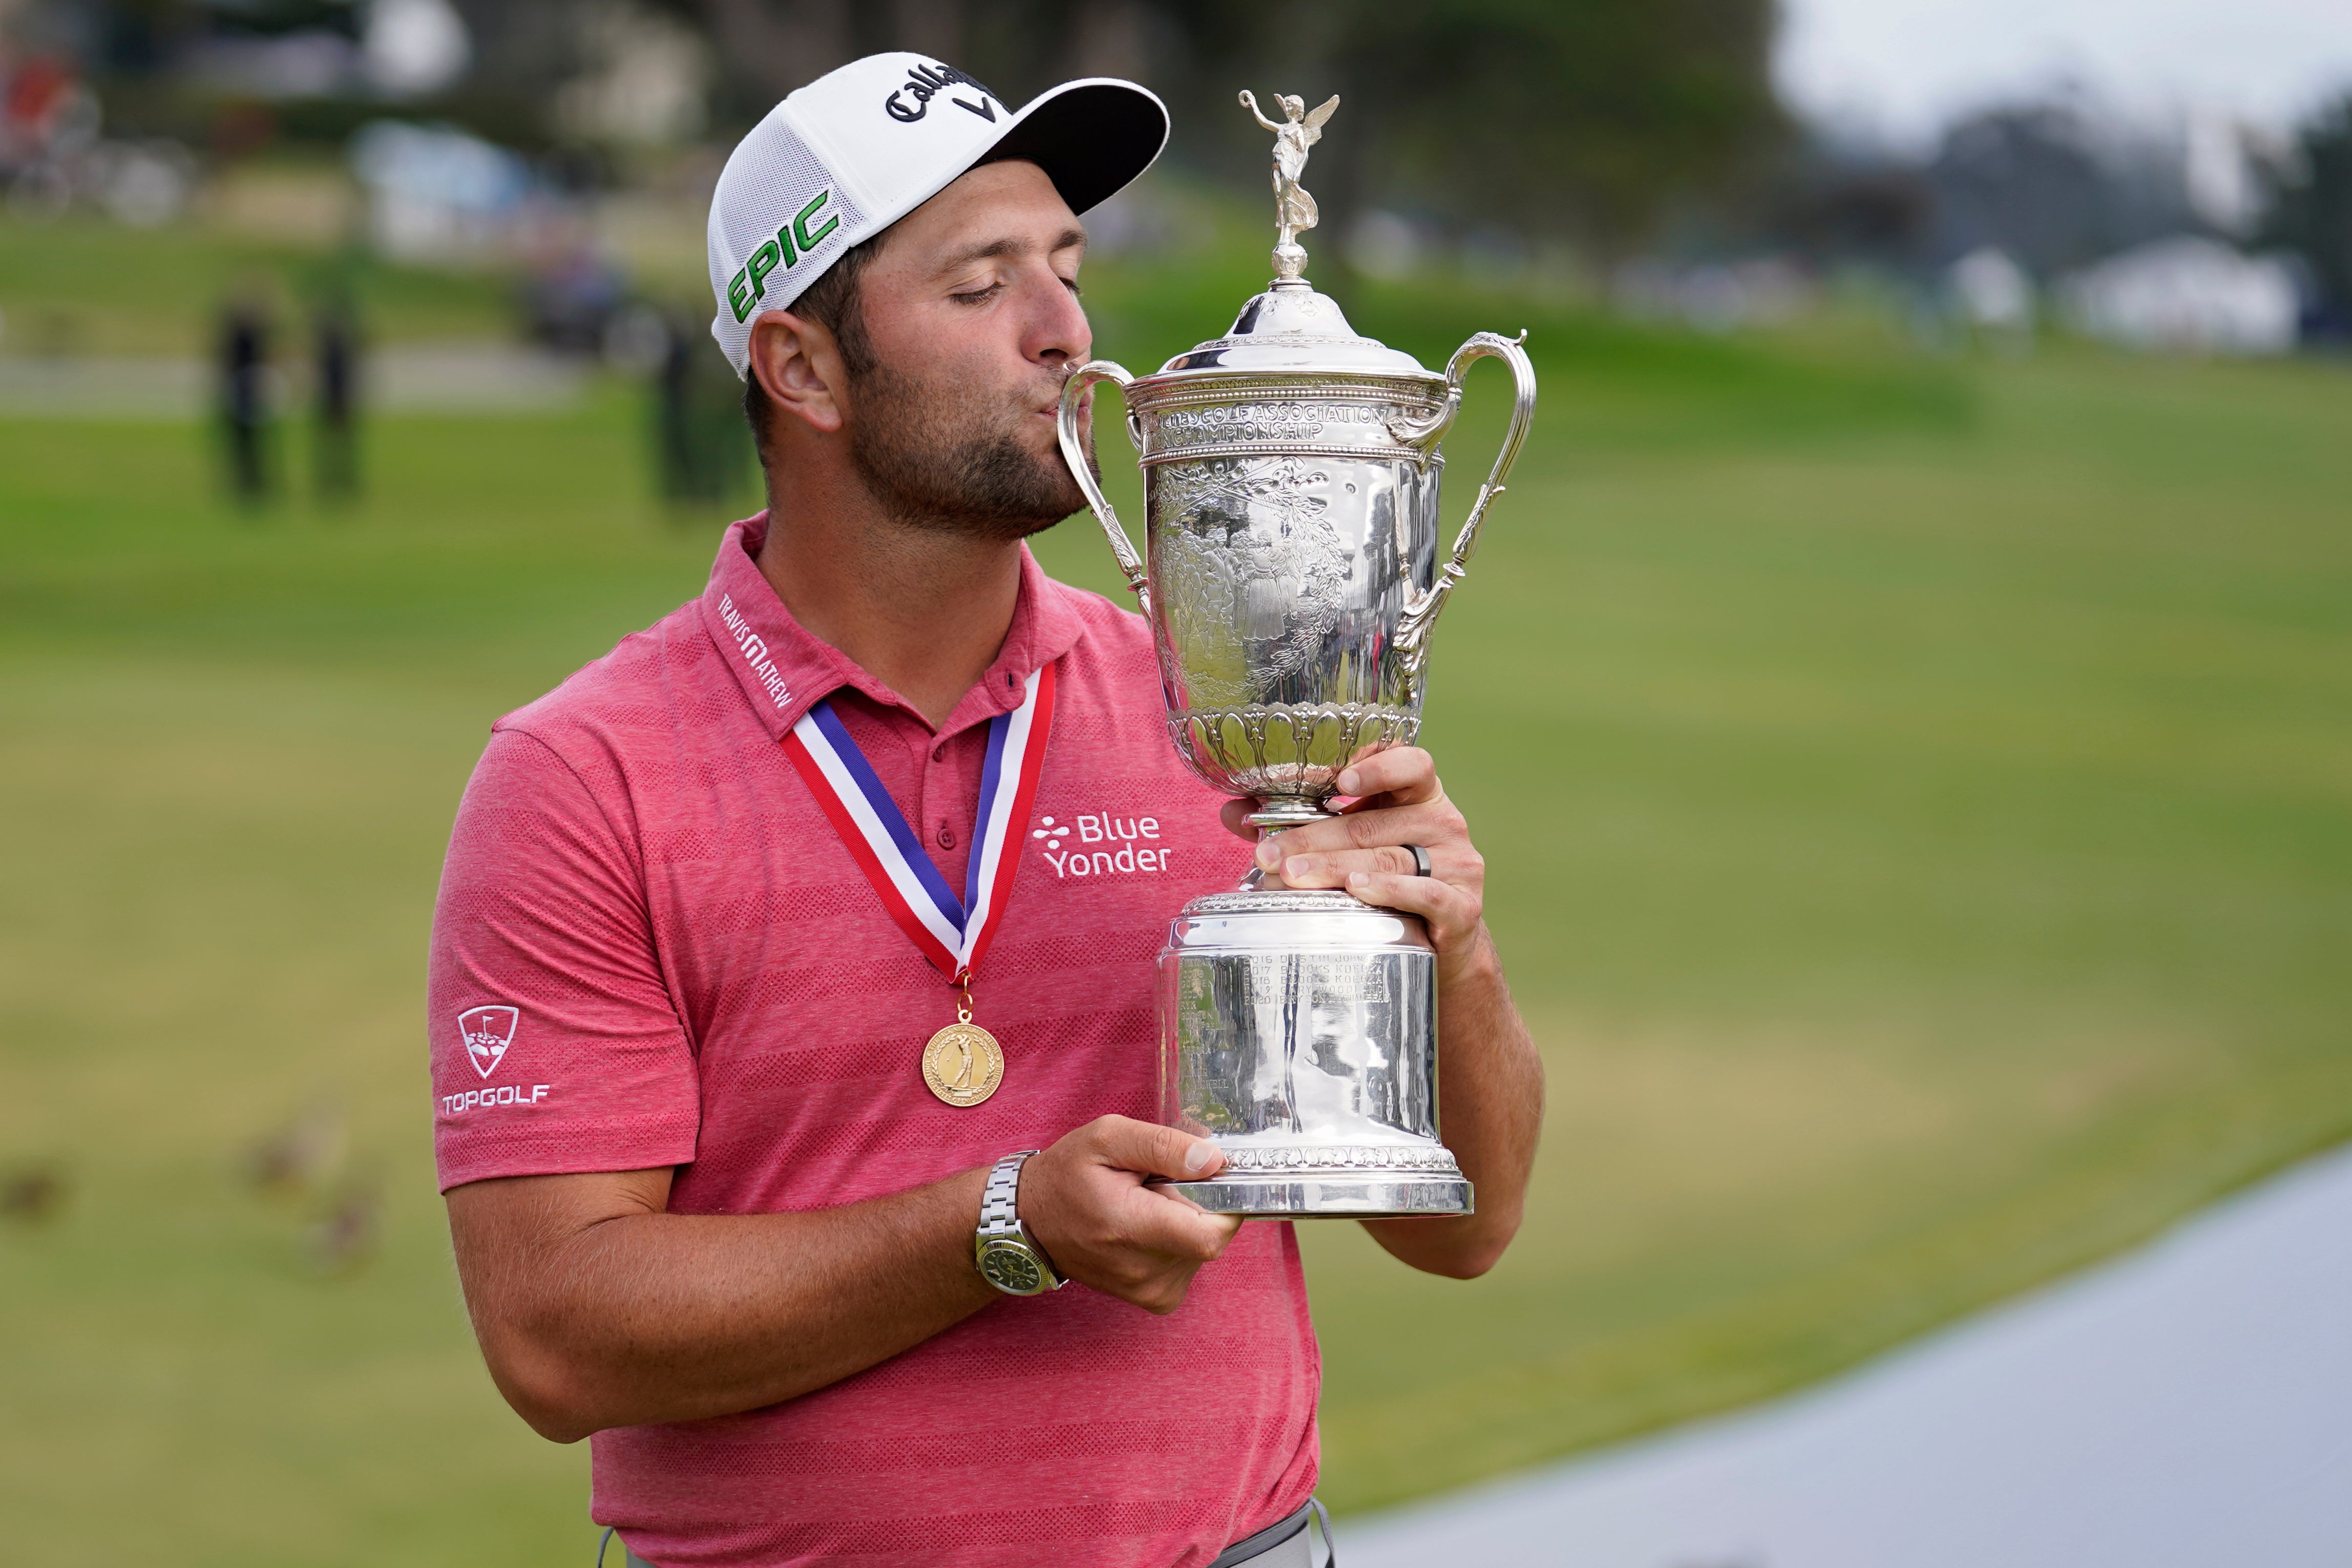 Jon Rahm won the US Open after birdies on the two closing holes